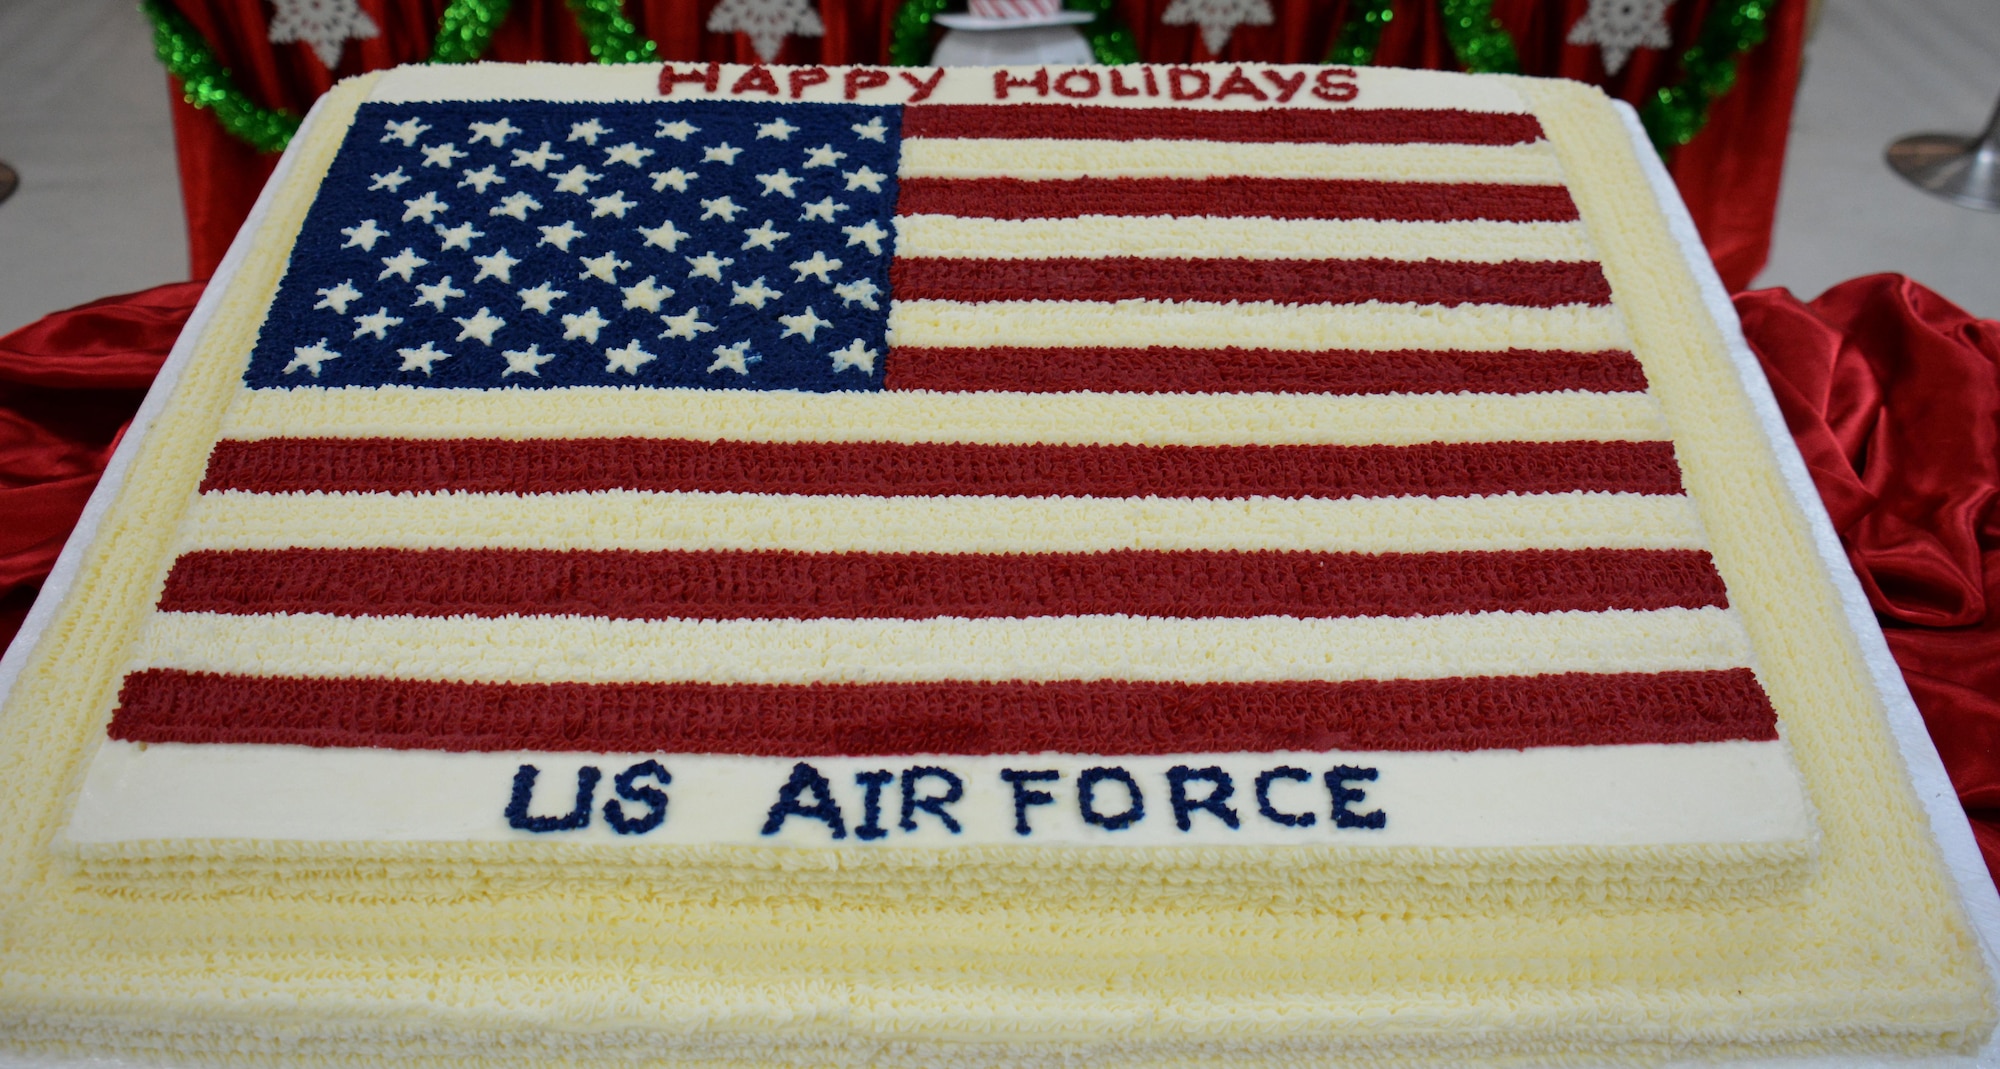 A cake decorated with the American flag is displayed inside the Independence Dining Facility at Al Udeid Air Base, Qatar Dec. 25. The cake was one of three offered for desert to the hundreds of service members who attended the holiday lunch on Christmas day. The holiday menu included lobster, turkey and a variety of deserts including pie and ice cream. (U.S. Air Force photo by Tech. Sgt. James Hodgman/Released)